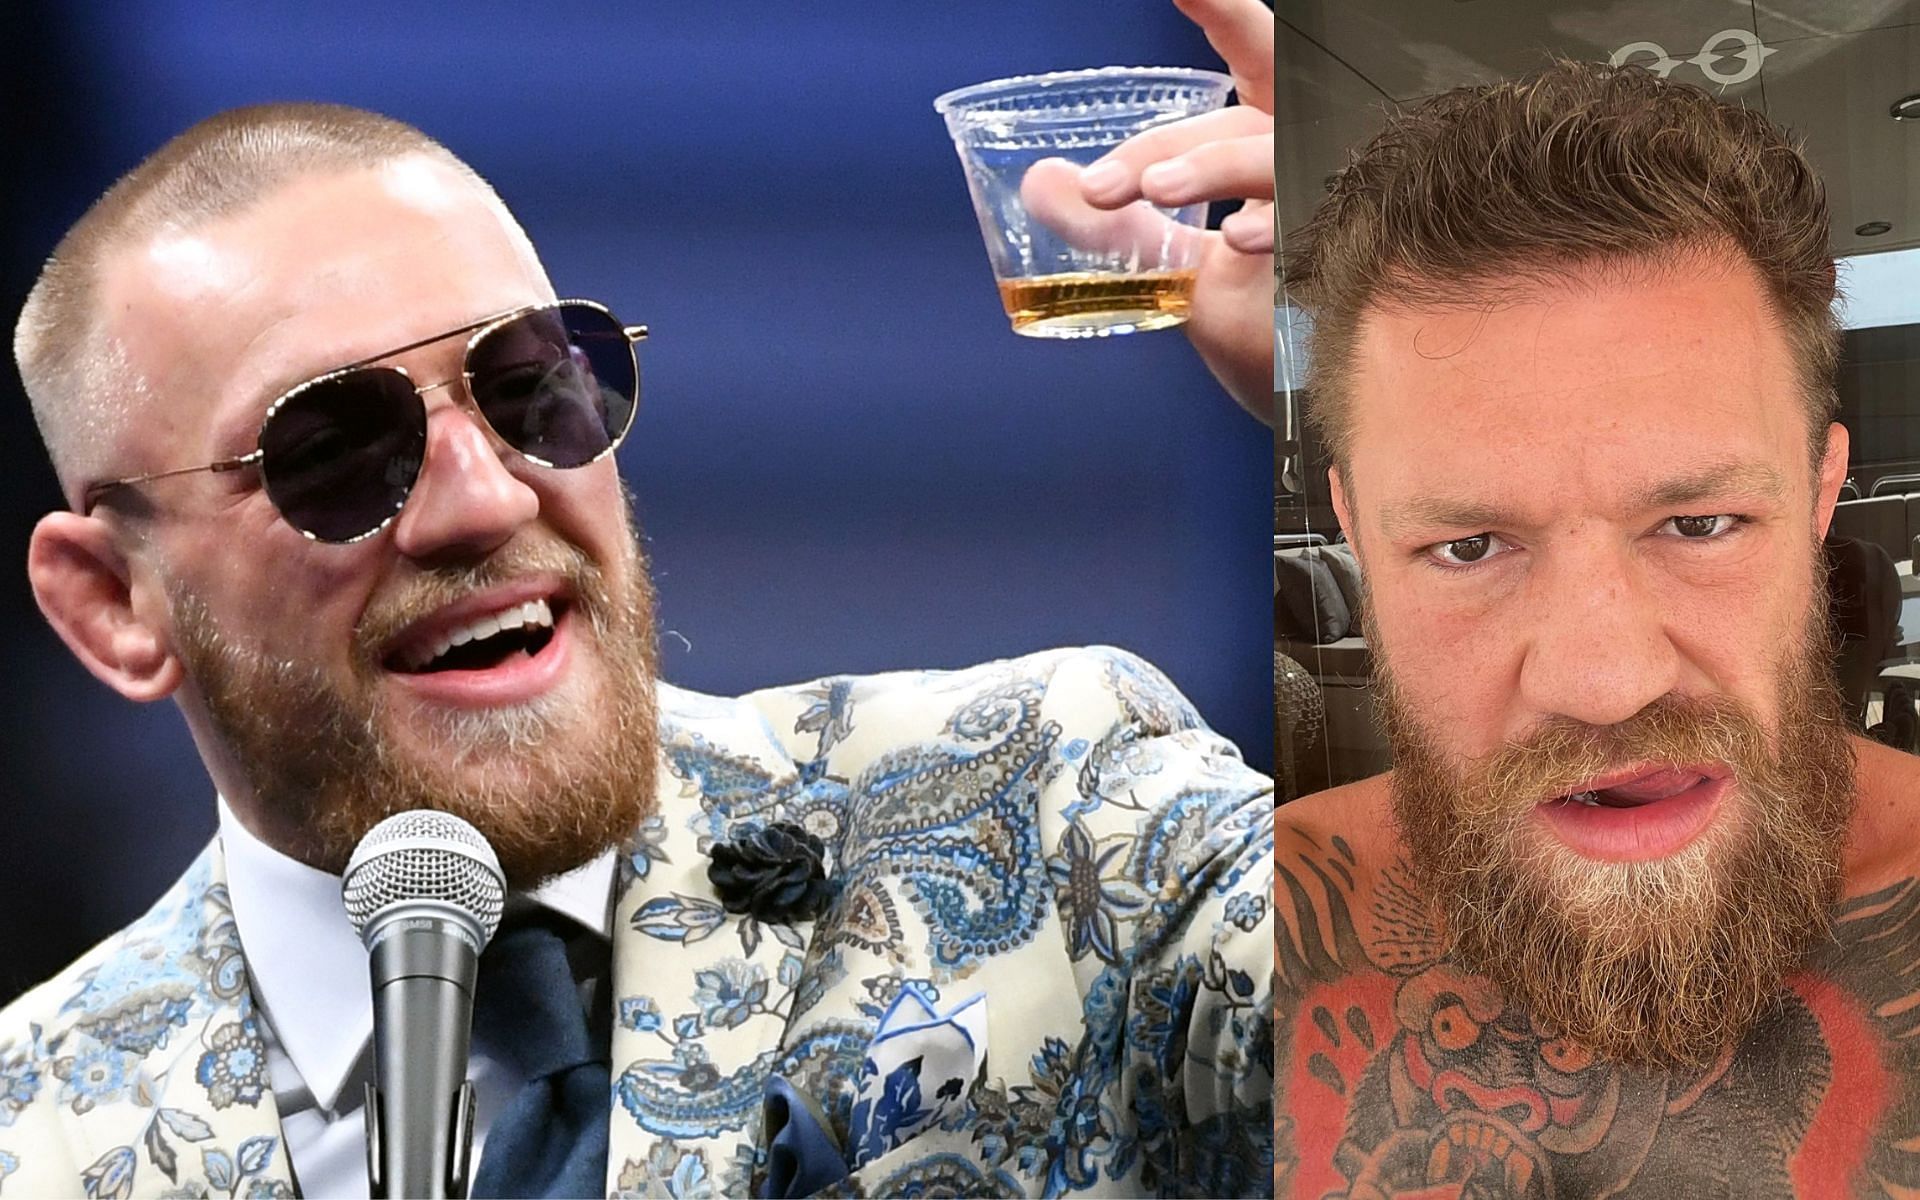 Conor McGregor in 2017 (left) and him in 2022 (right). [Images courtesy: left image from Getty Images and right image from Instagram @thenotoriousmma]